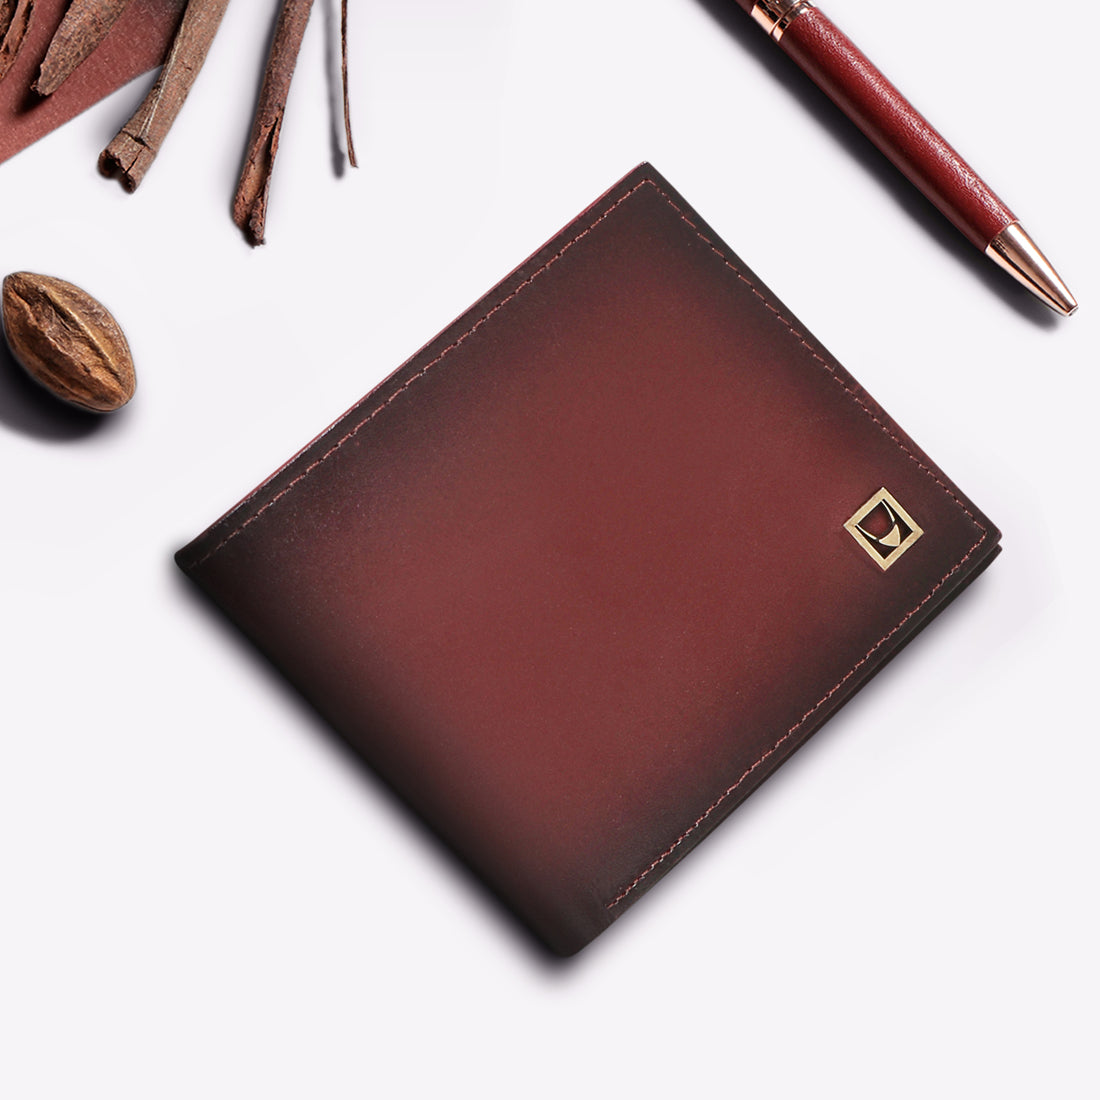 Wallets and Leather Goods